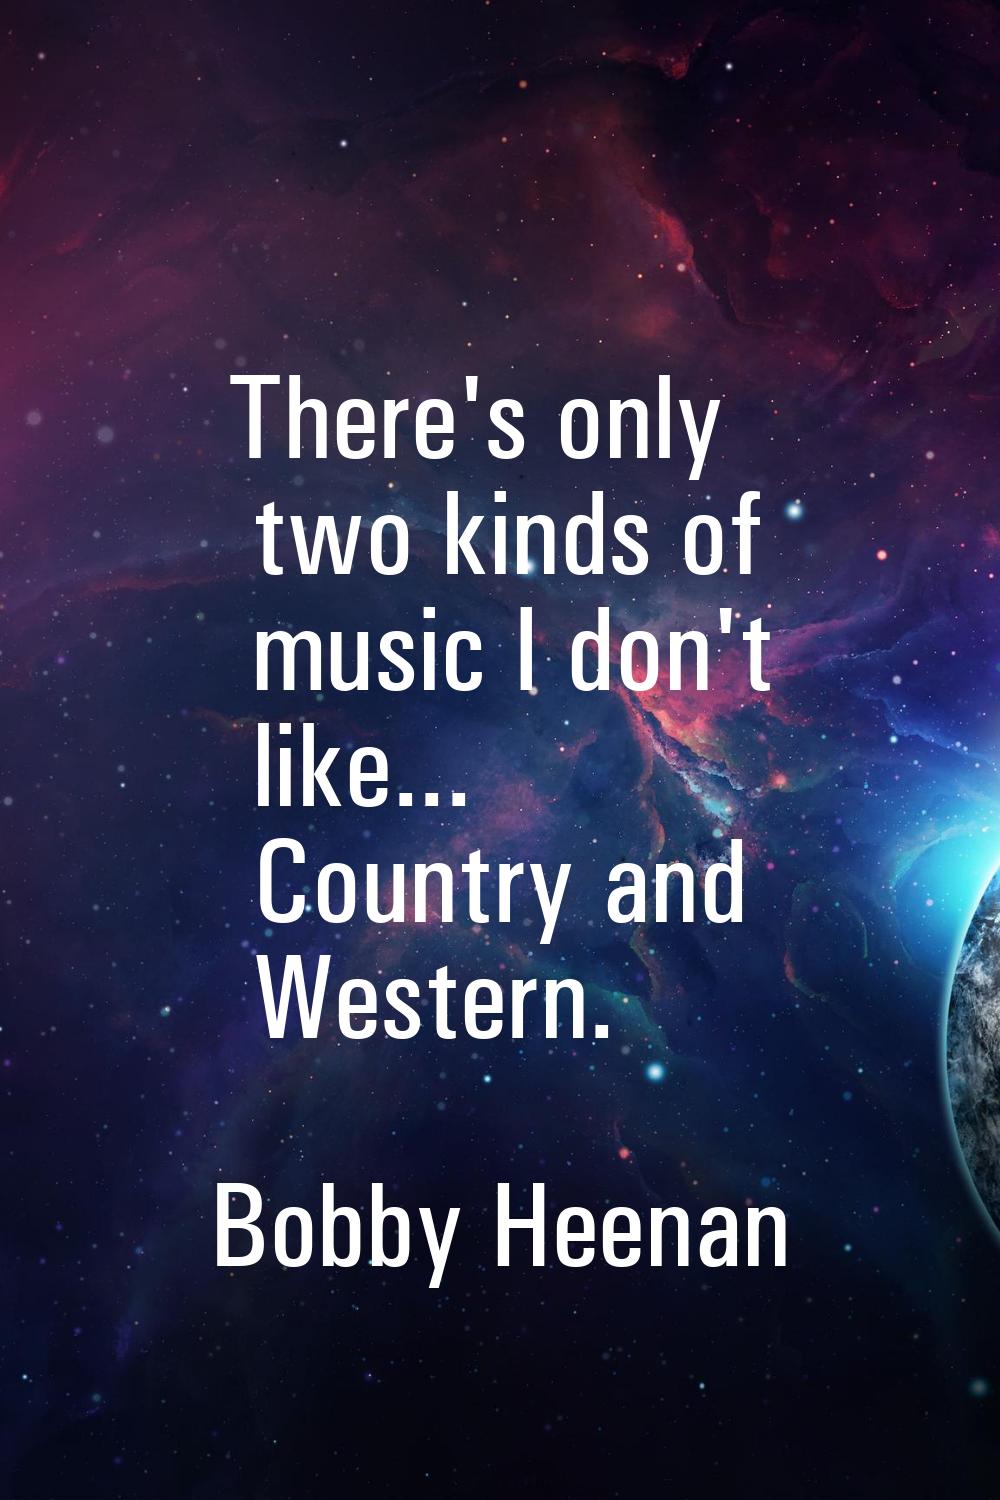 There's only two kinds of music I don't like... Country and Western.